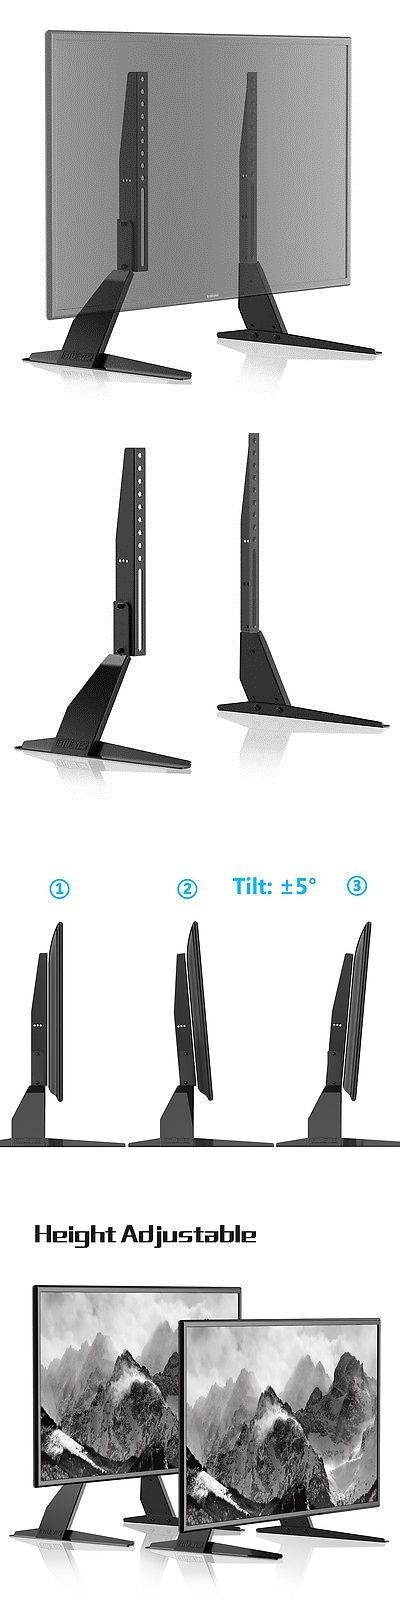 Excellent Elite Vizio 24 Inch TV Stands Inside Best 25 Universal Tv Stand Ideas Only On Pinterest Corner (View 23 of 50)